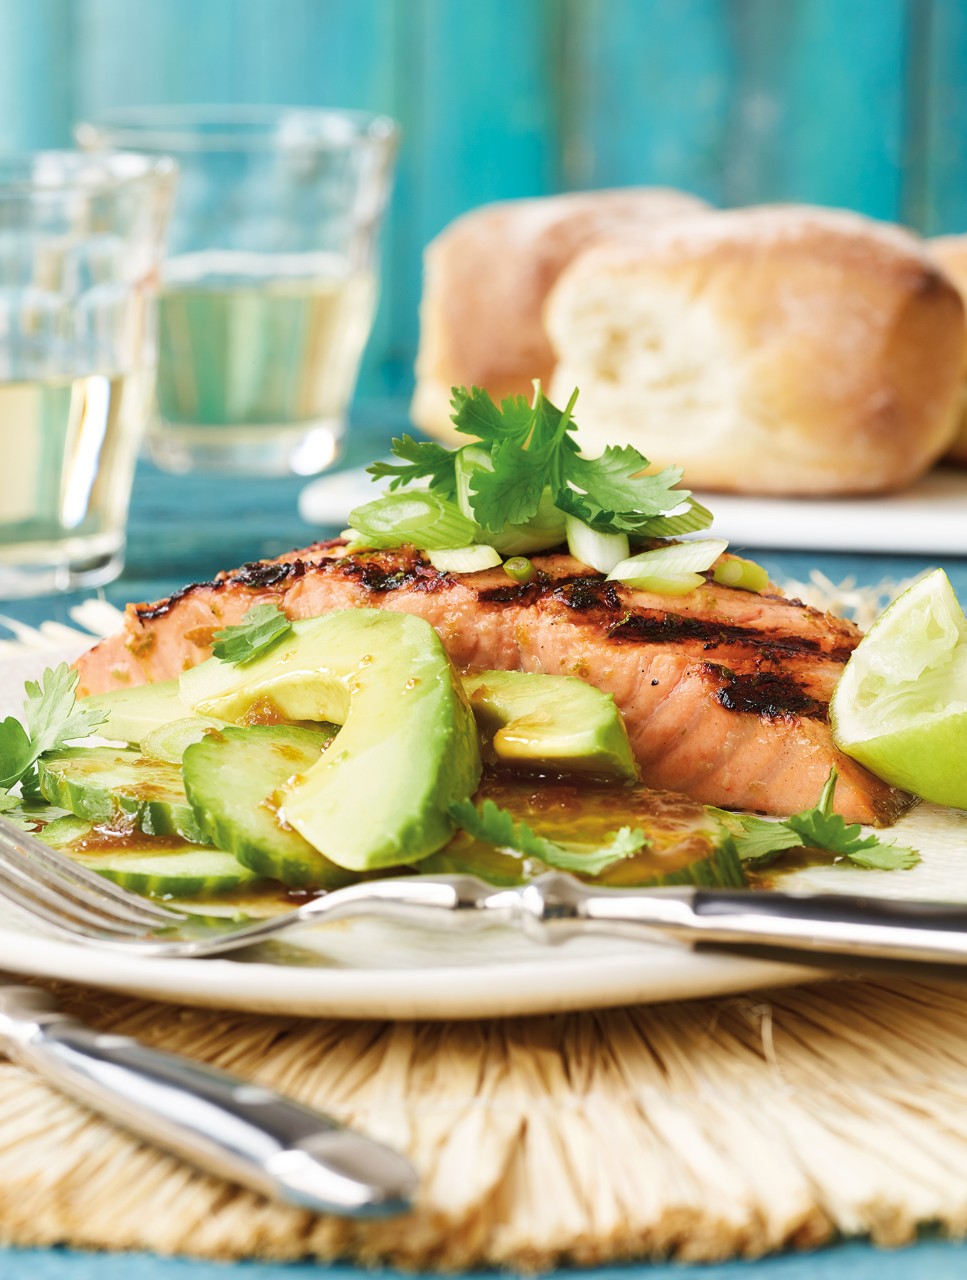 Australian Lime & Ginger-Grilled Salmon with Salad